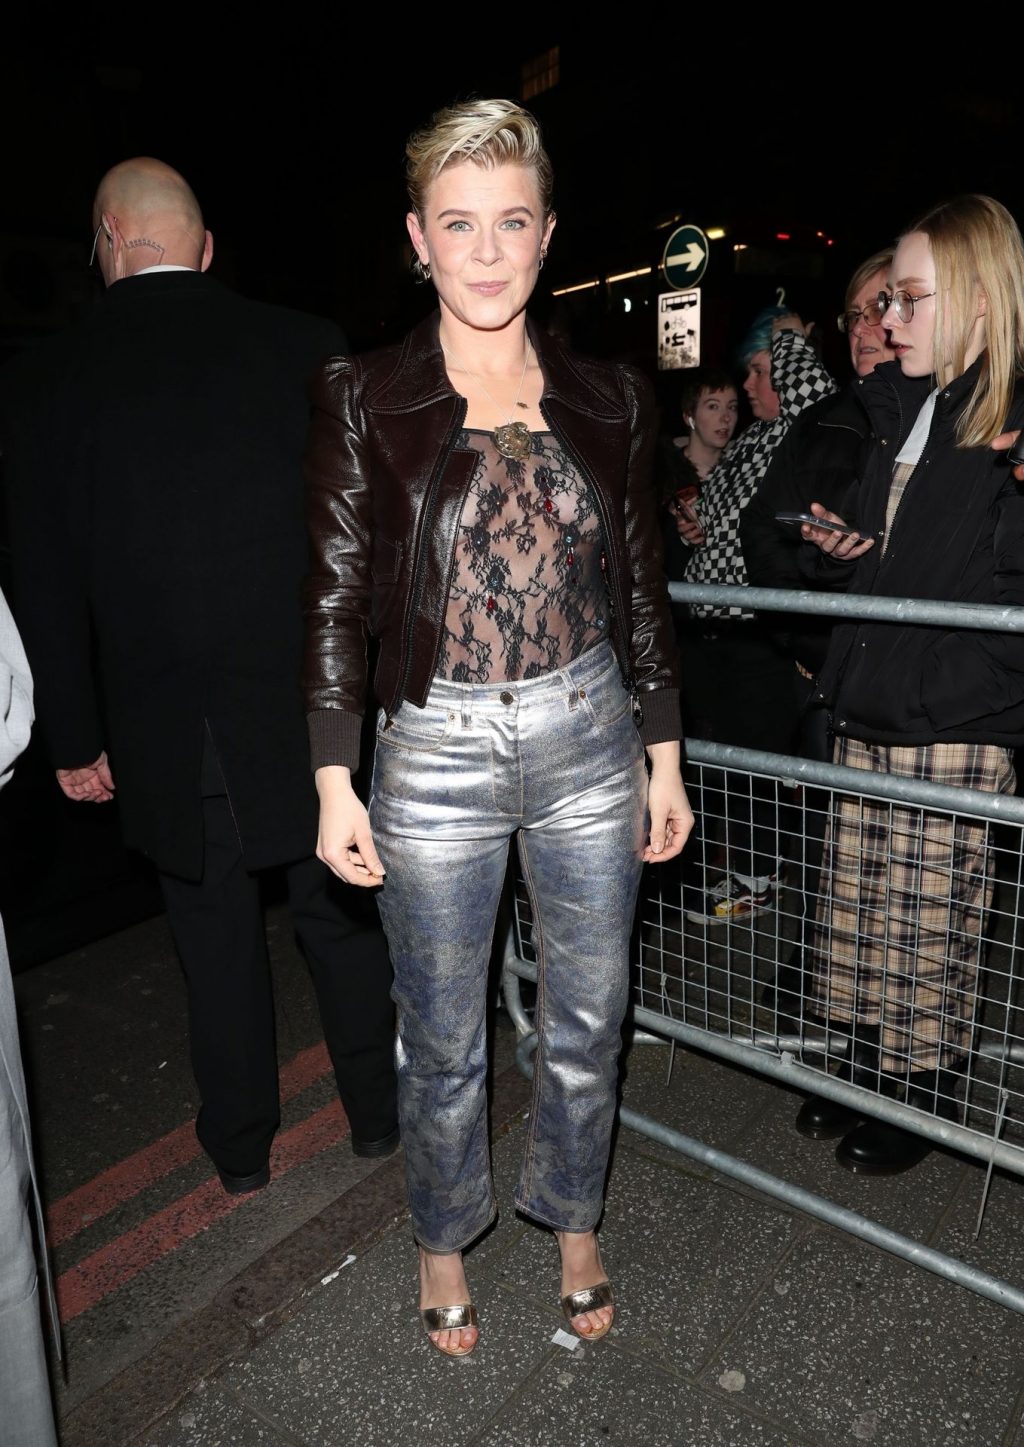 Robyn Makes Busty Appearance with a Friend Arrive at the NME Awards (14 Photos)